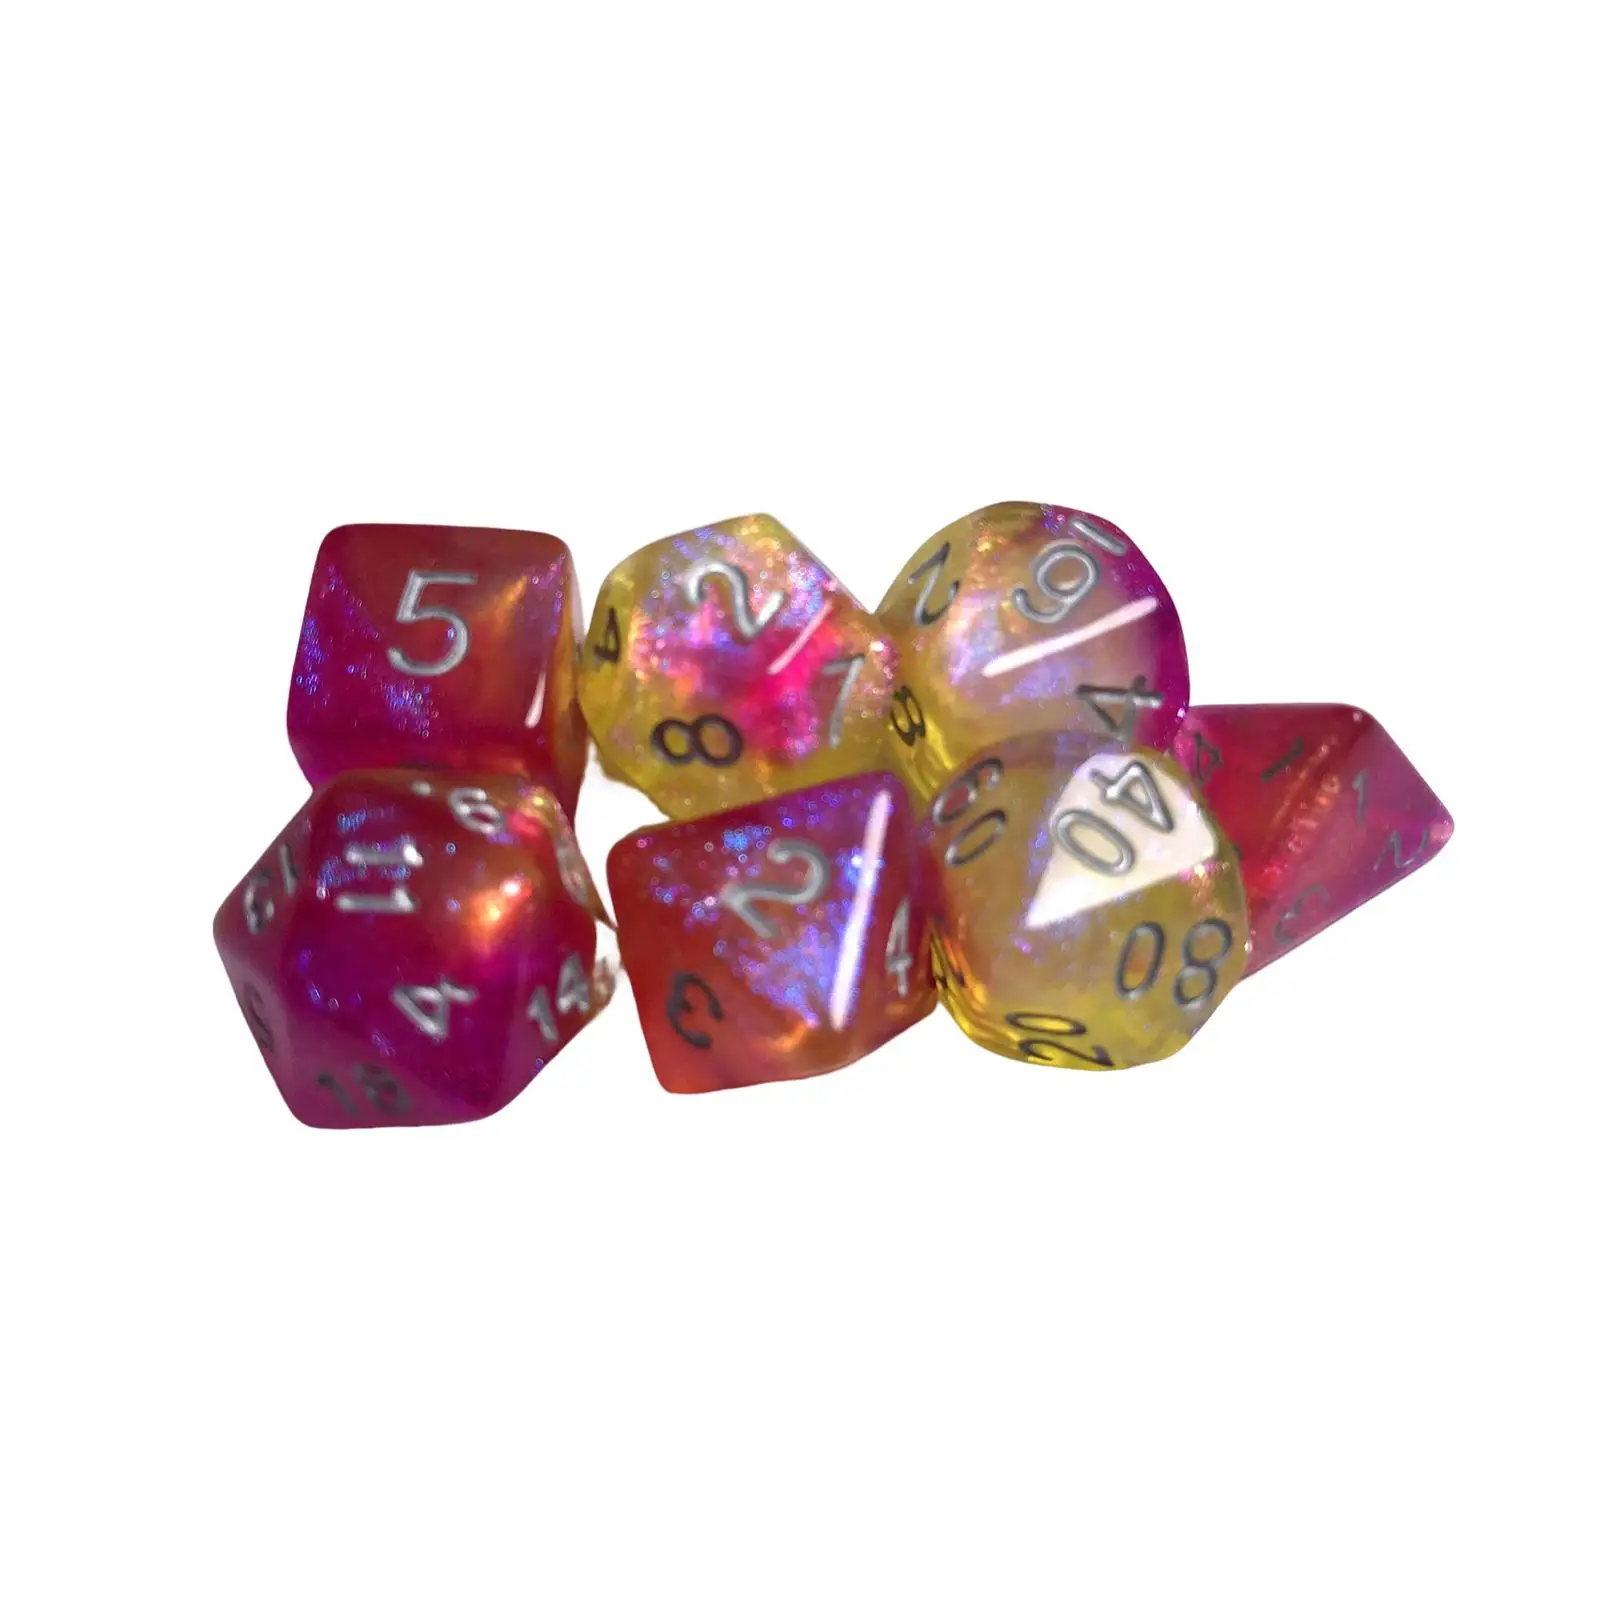 Acrylic Multi Sided Dices for Entertainment Math Party Supplies